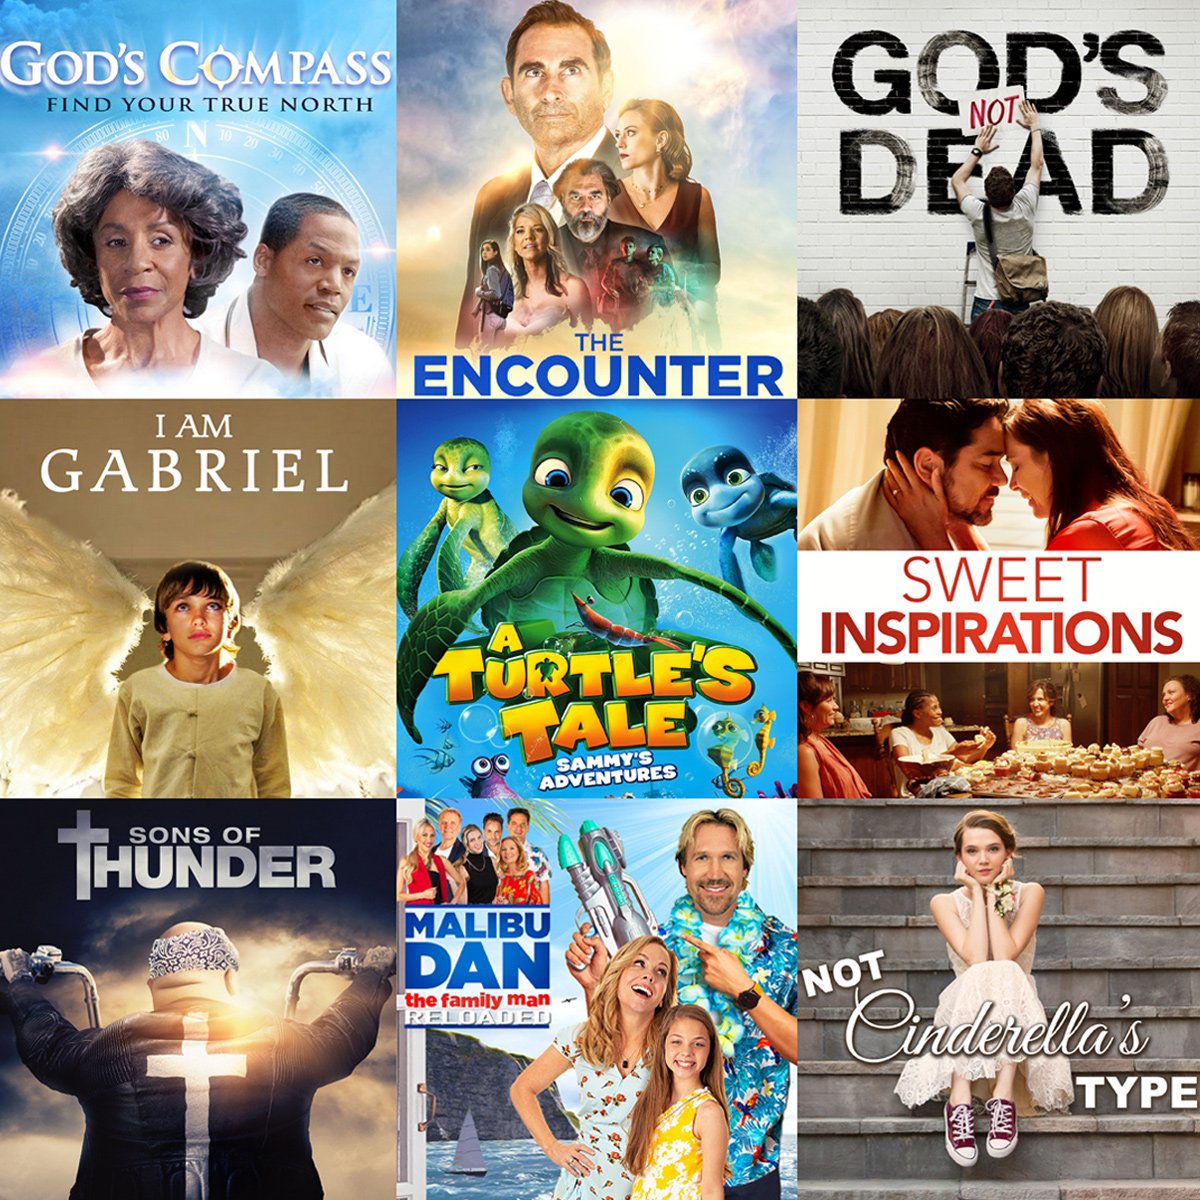 Heres 10 Christian Movies That Will Renew Your Faith